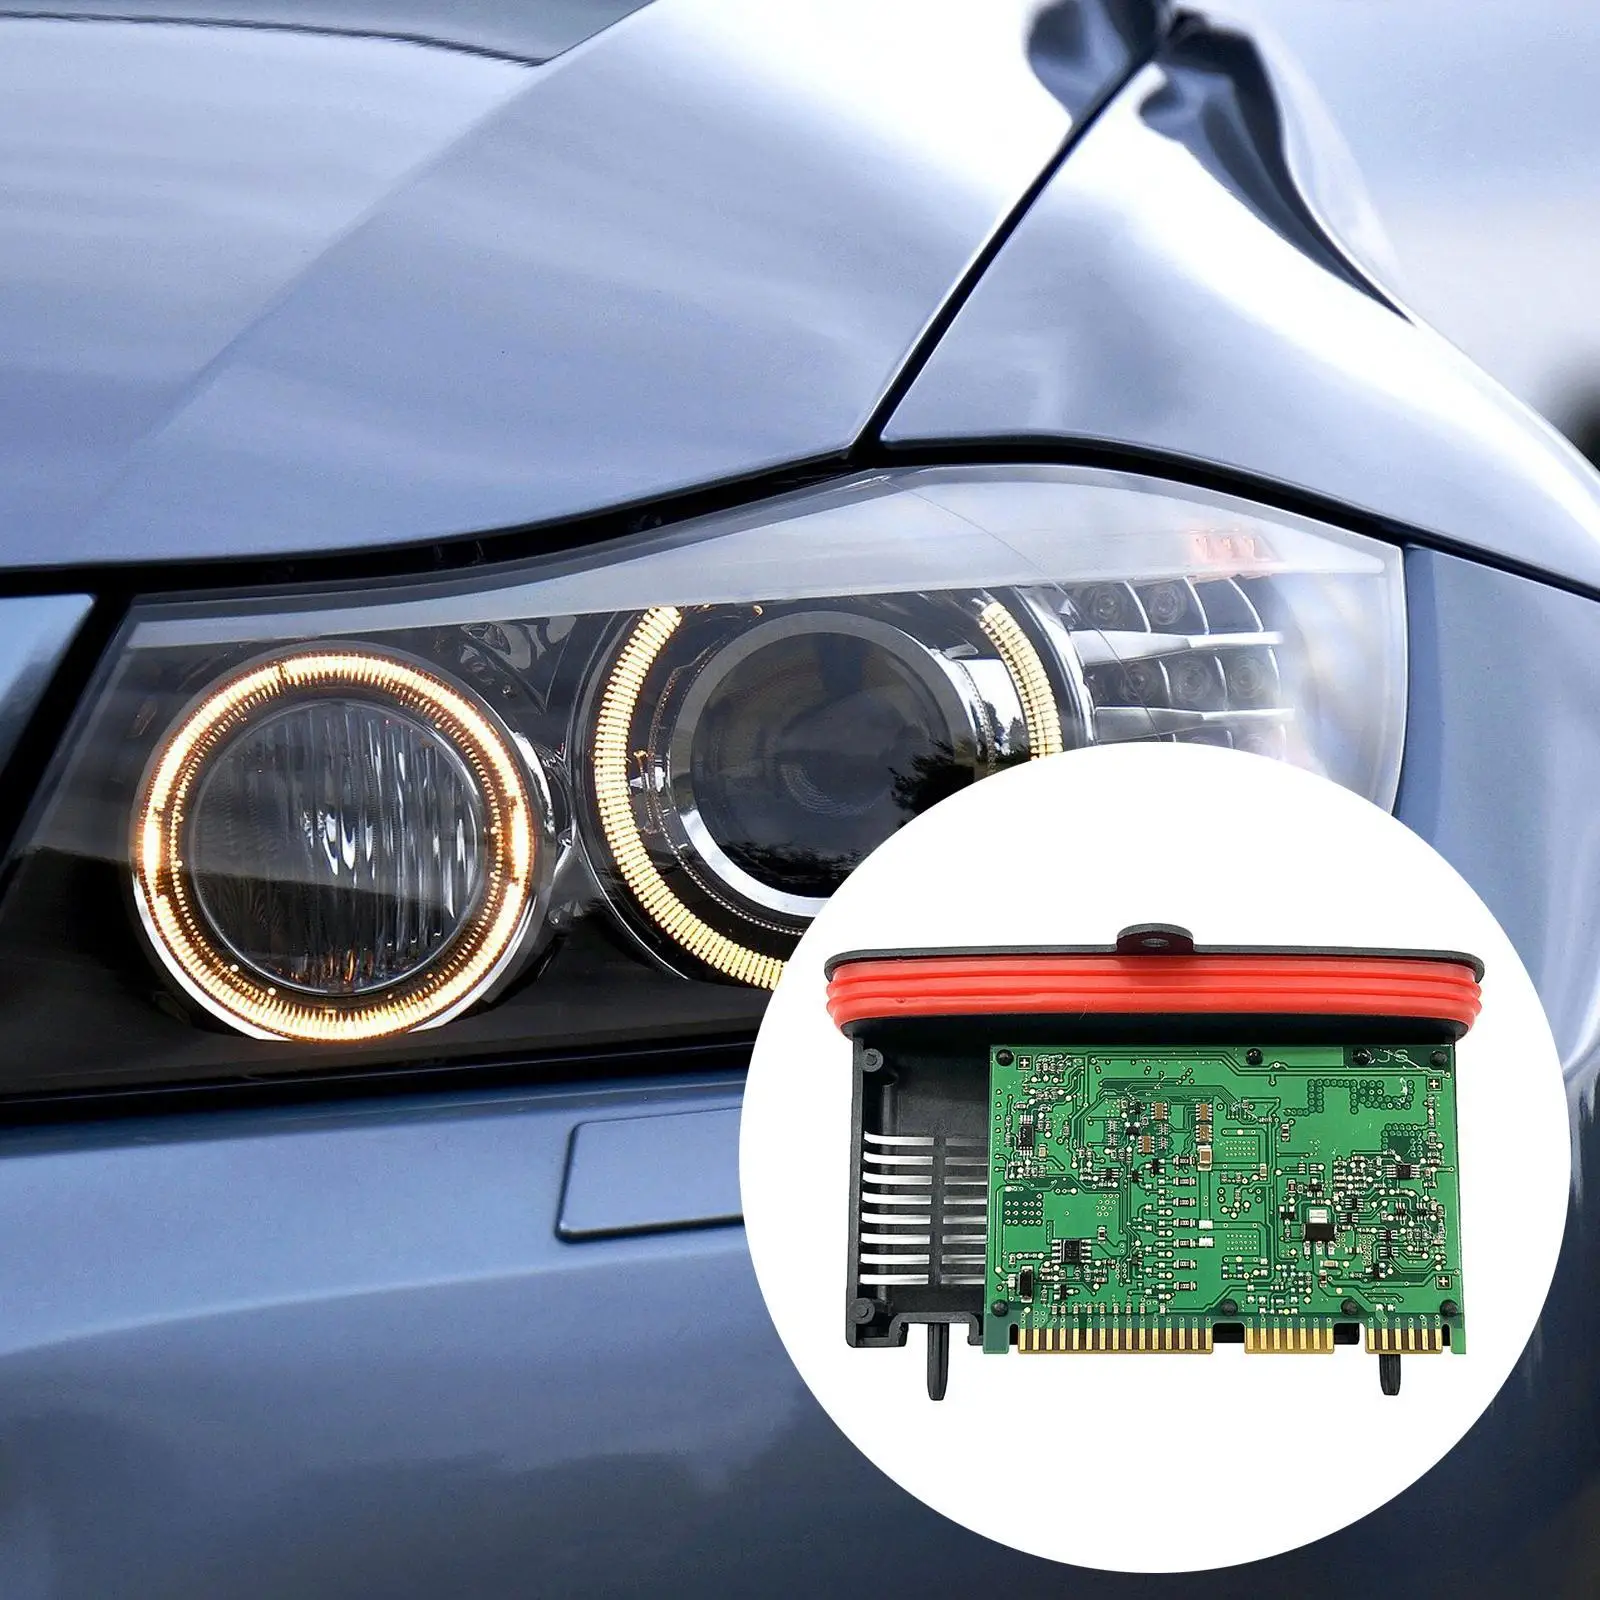 LED Headlight Driver Module Replacement for BMW 5 Series F82 F10 F11 F33 F18, Material: high quality ABS & Metal finish